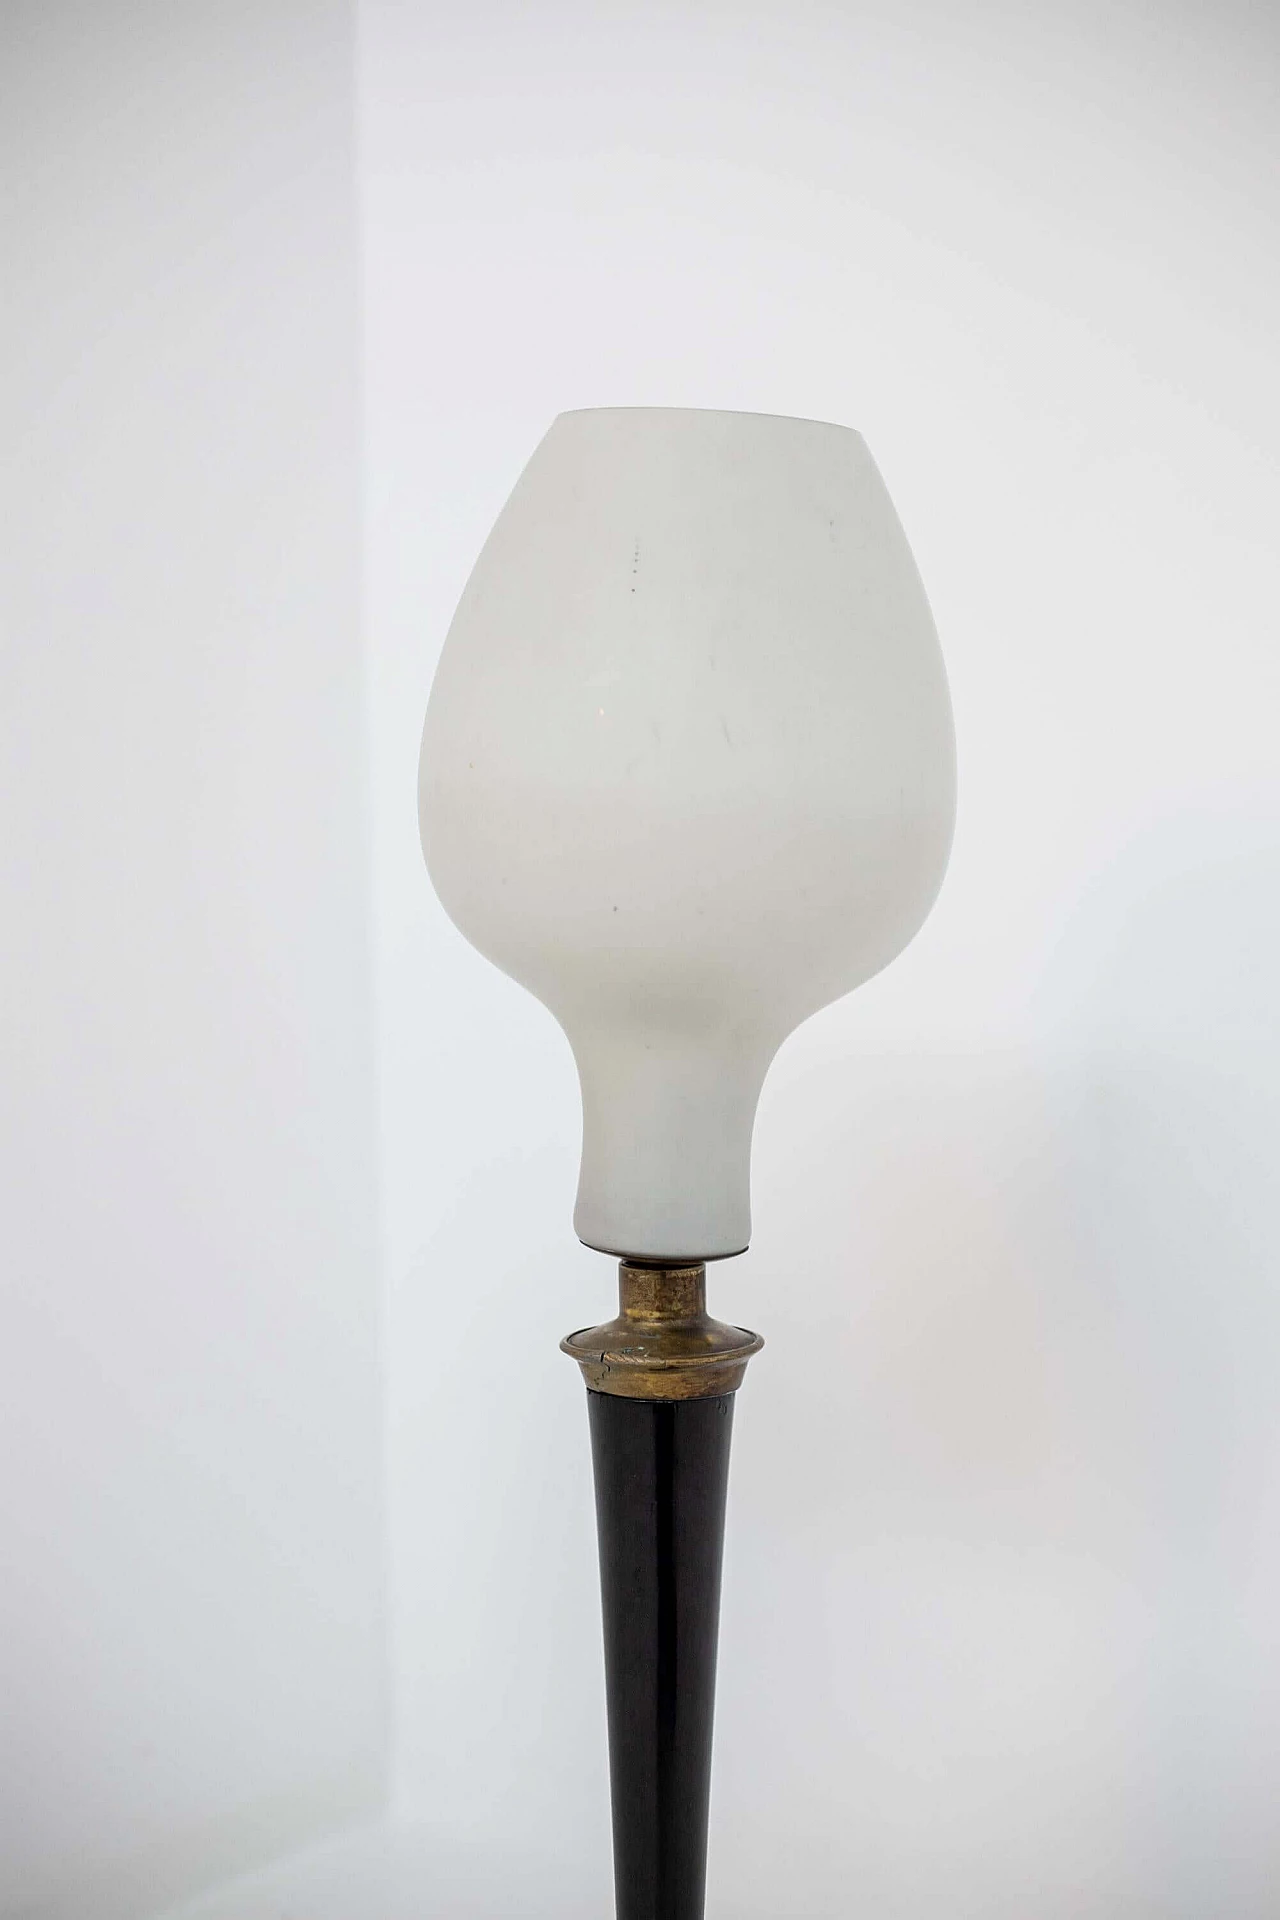 Opal glass table lamp with wood and brass frame, 1950s 1400585